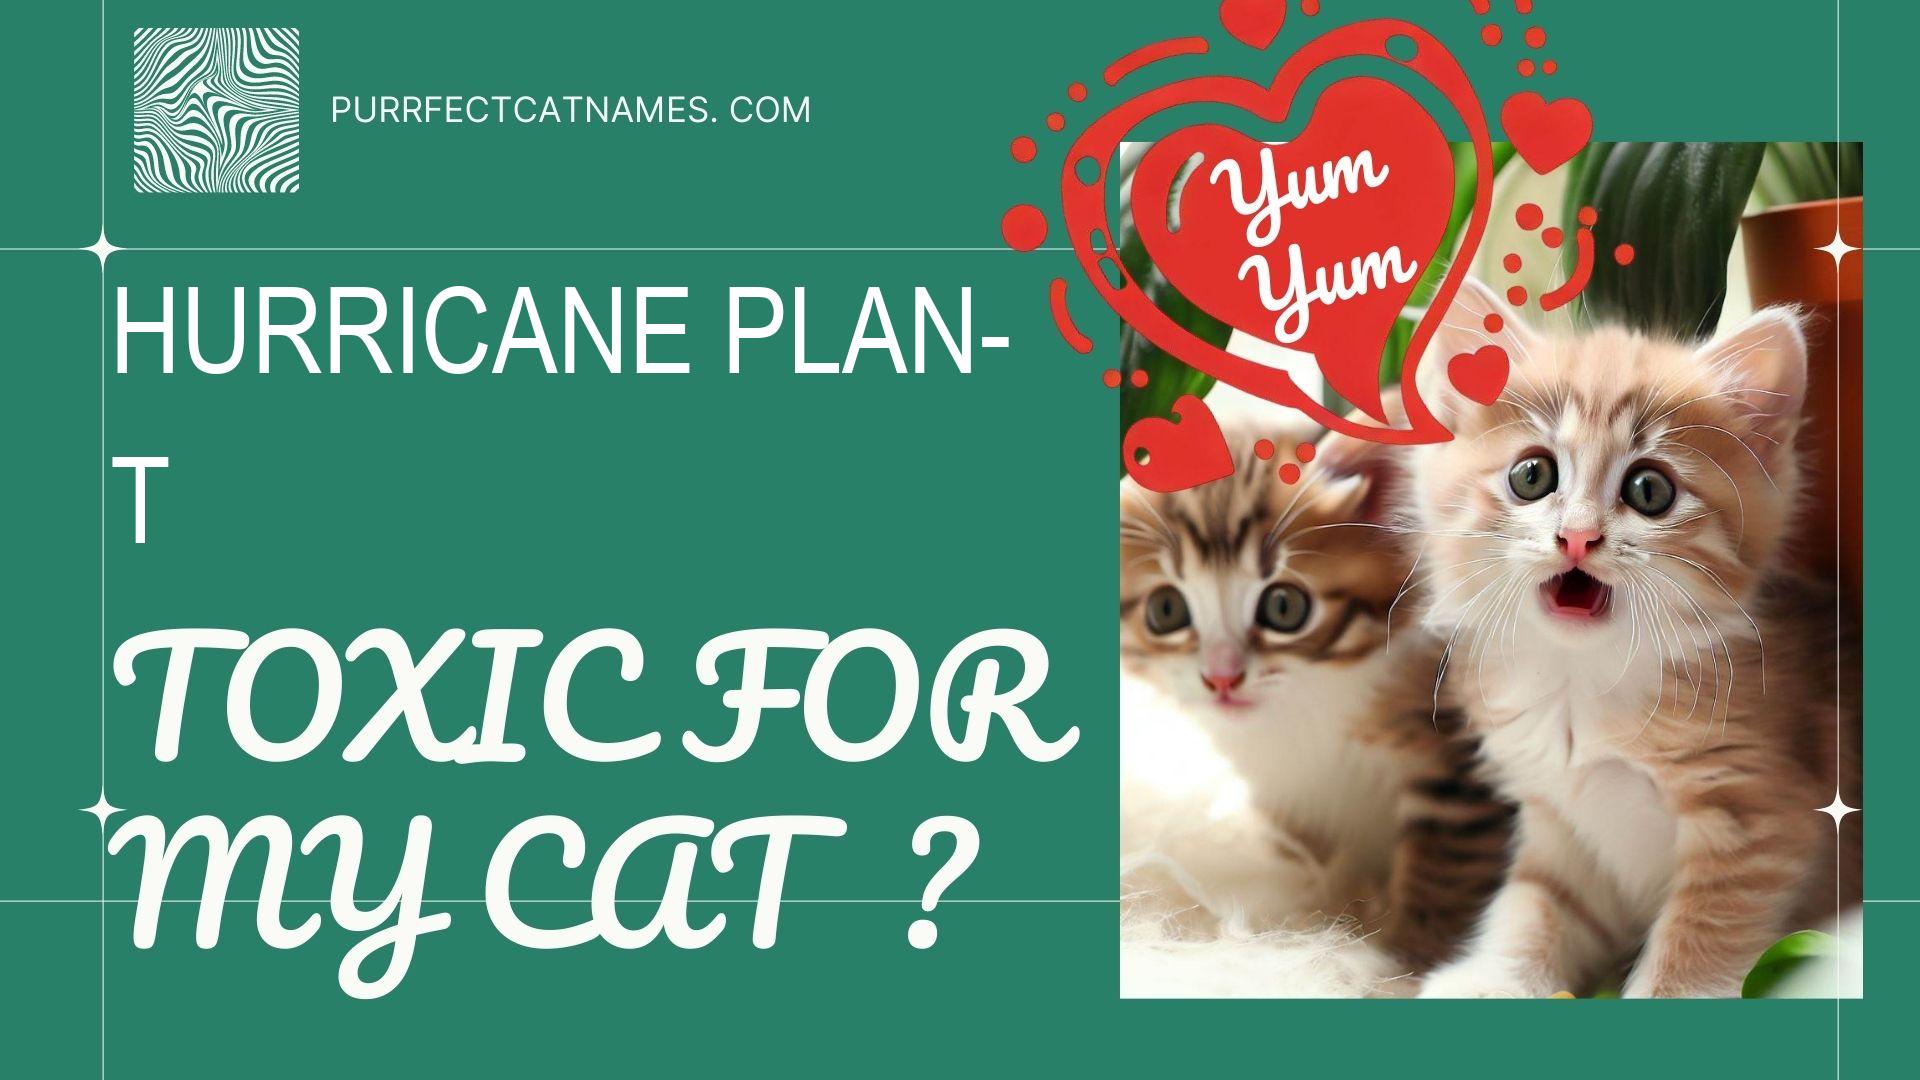 IsHurricane Plant plant toxic for your cat